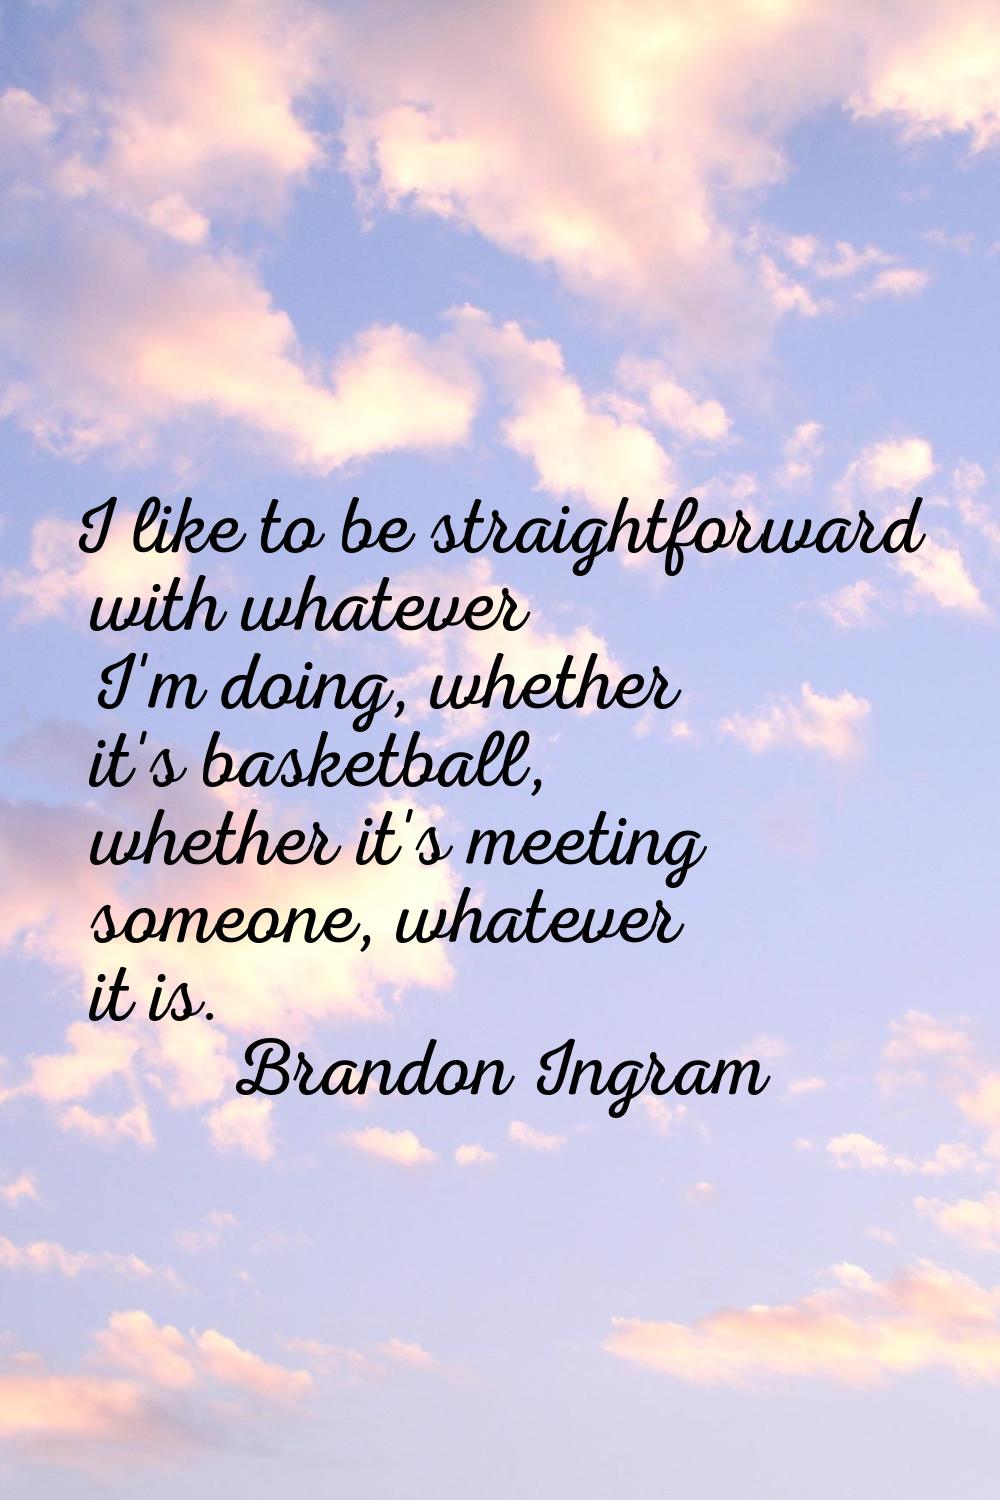 I like to be straightforward with whatever I'm doing, whether it's basketball, whether it's meeting